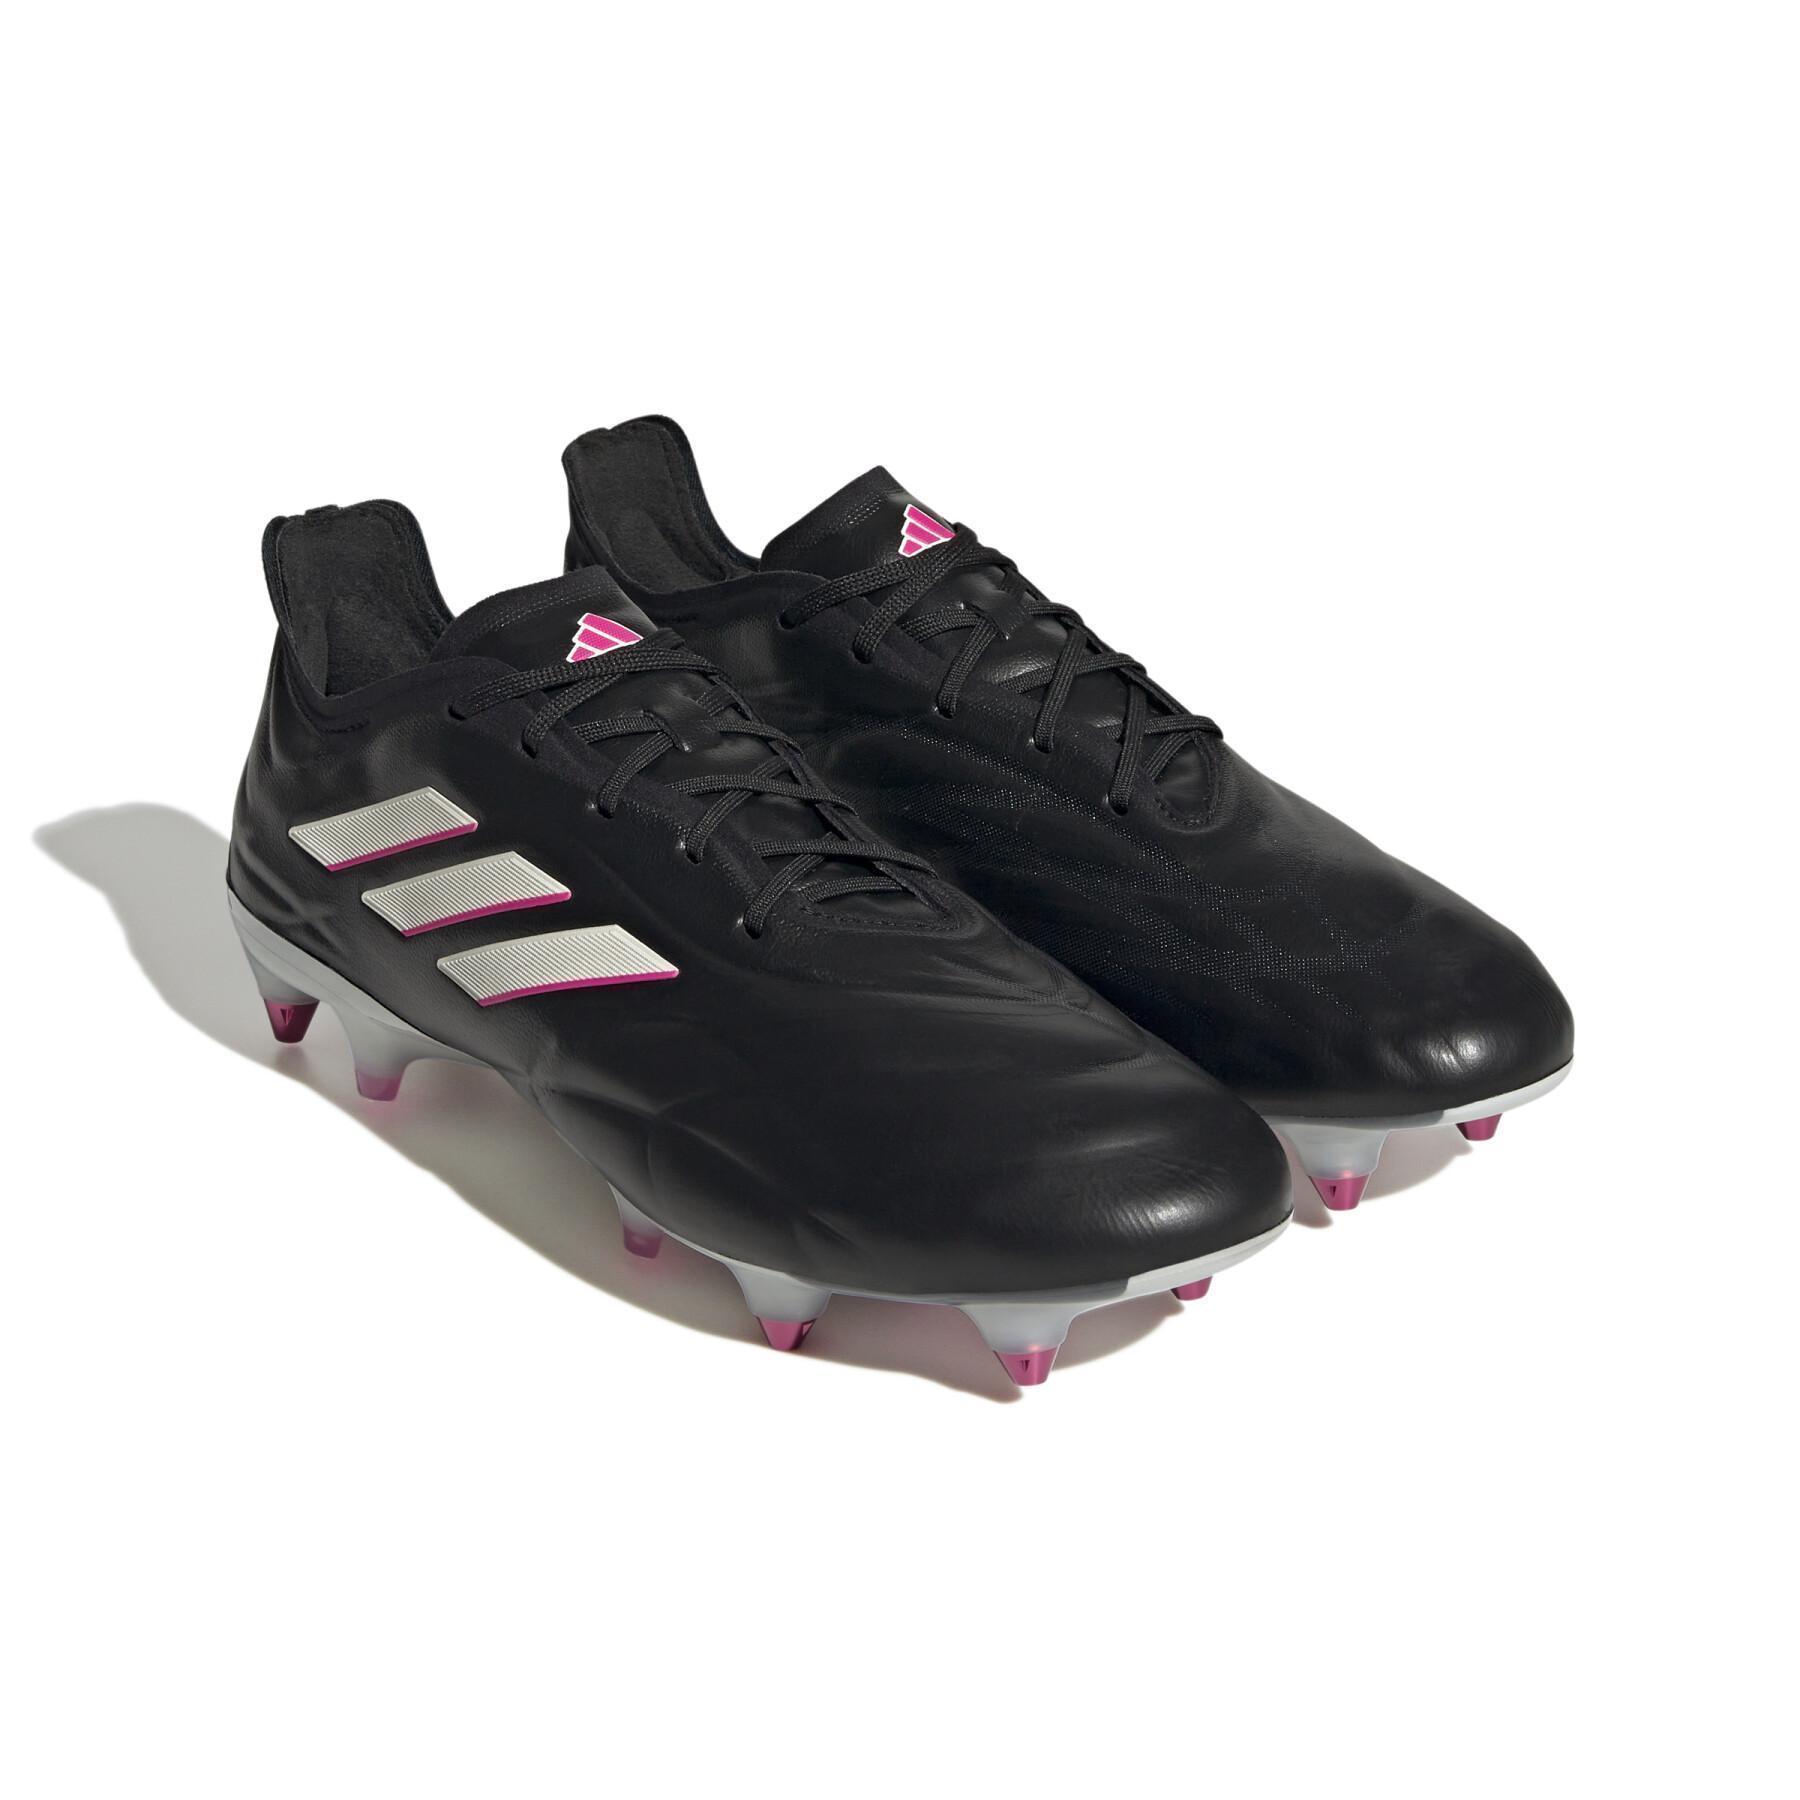 Soccer shoes adidas Copa Pure.1 SG